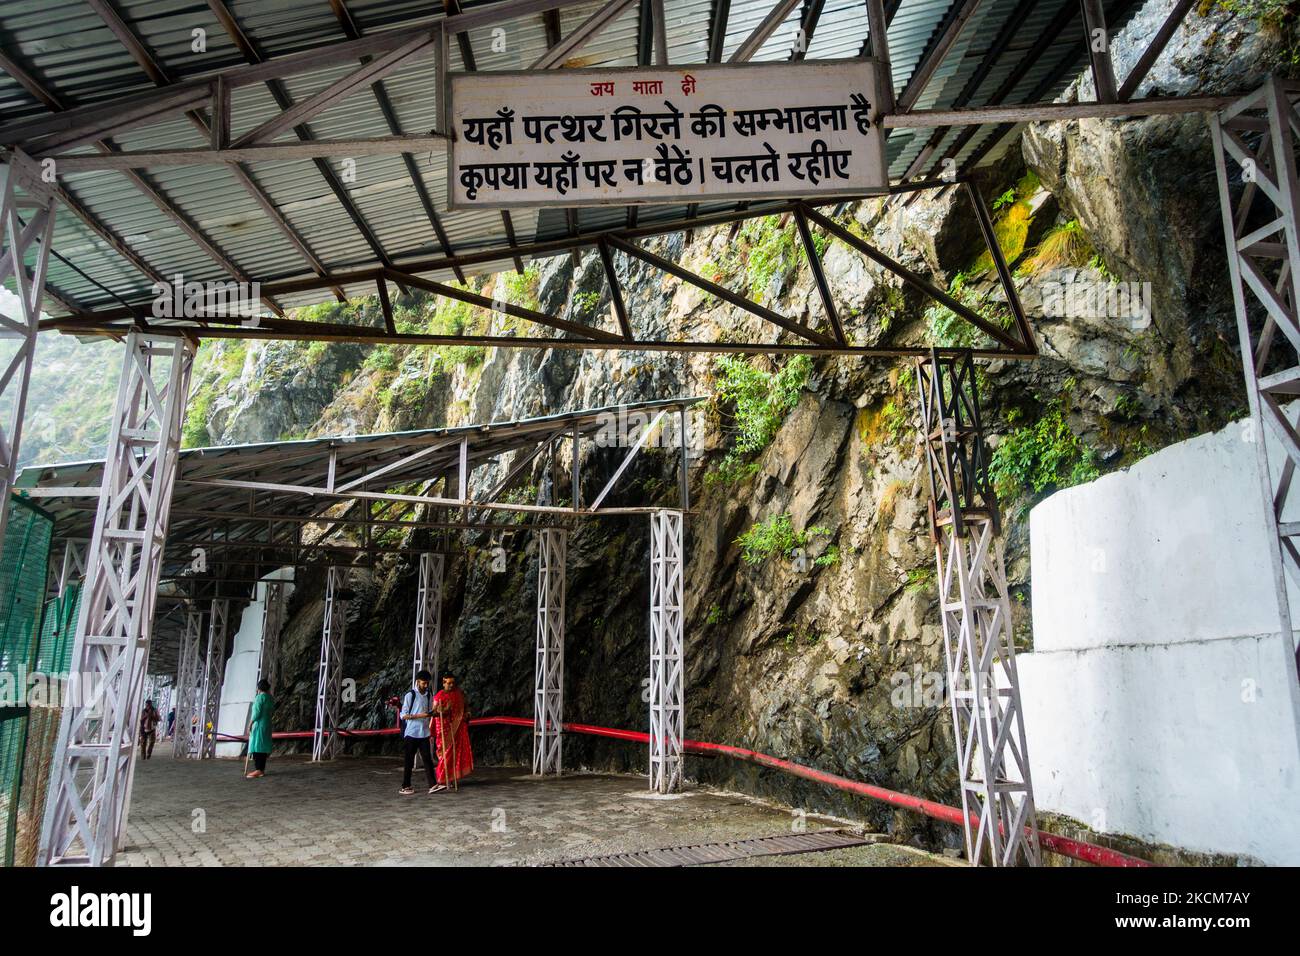 July 5th 2022 Katra, Jammu and Kashmir, India. A Public Notice board written in Hindi Language addressing 'the dangers of falling stones from the Moun Stock Photo